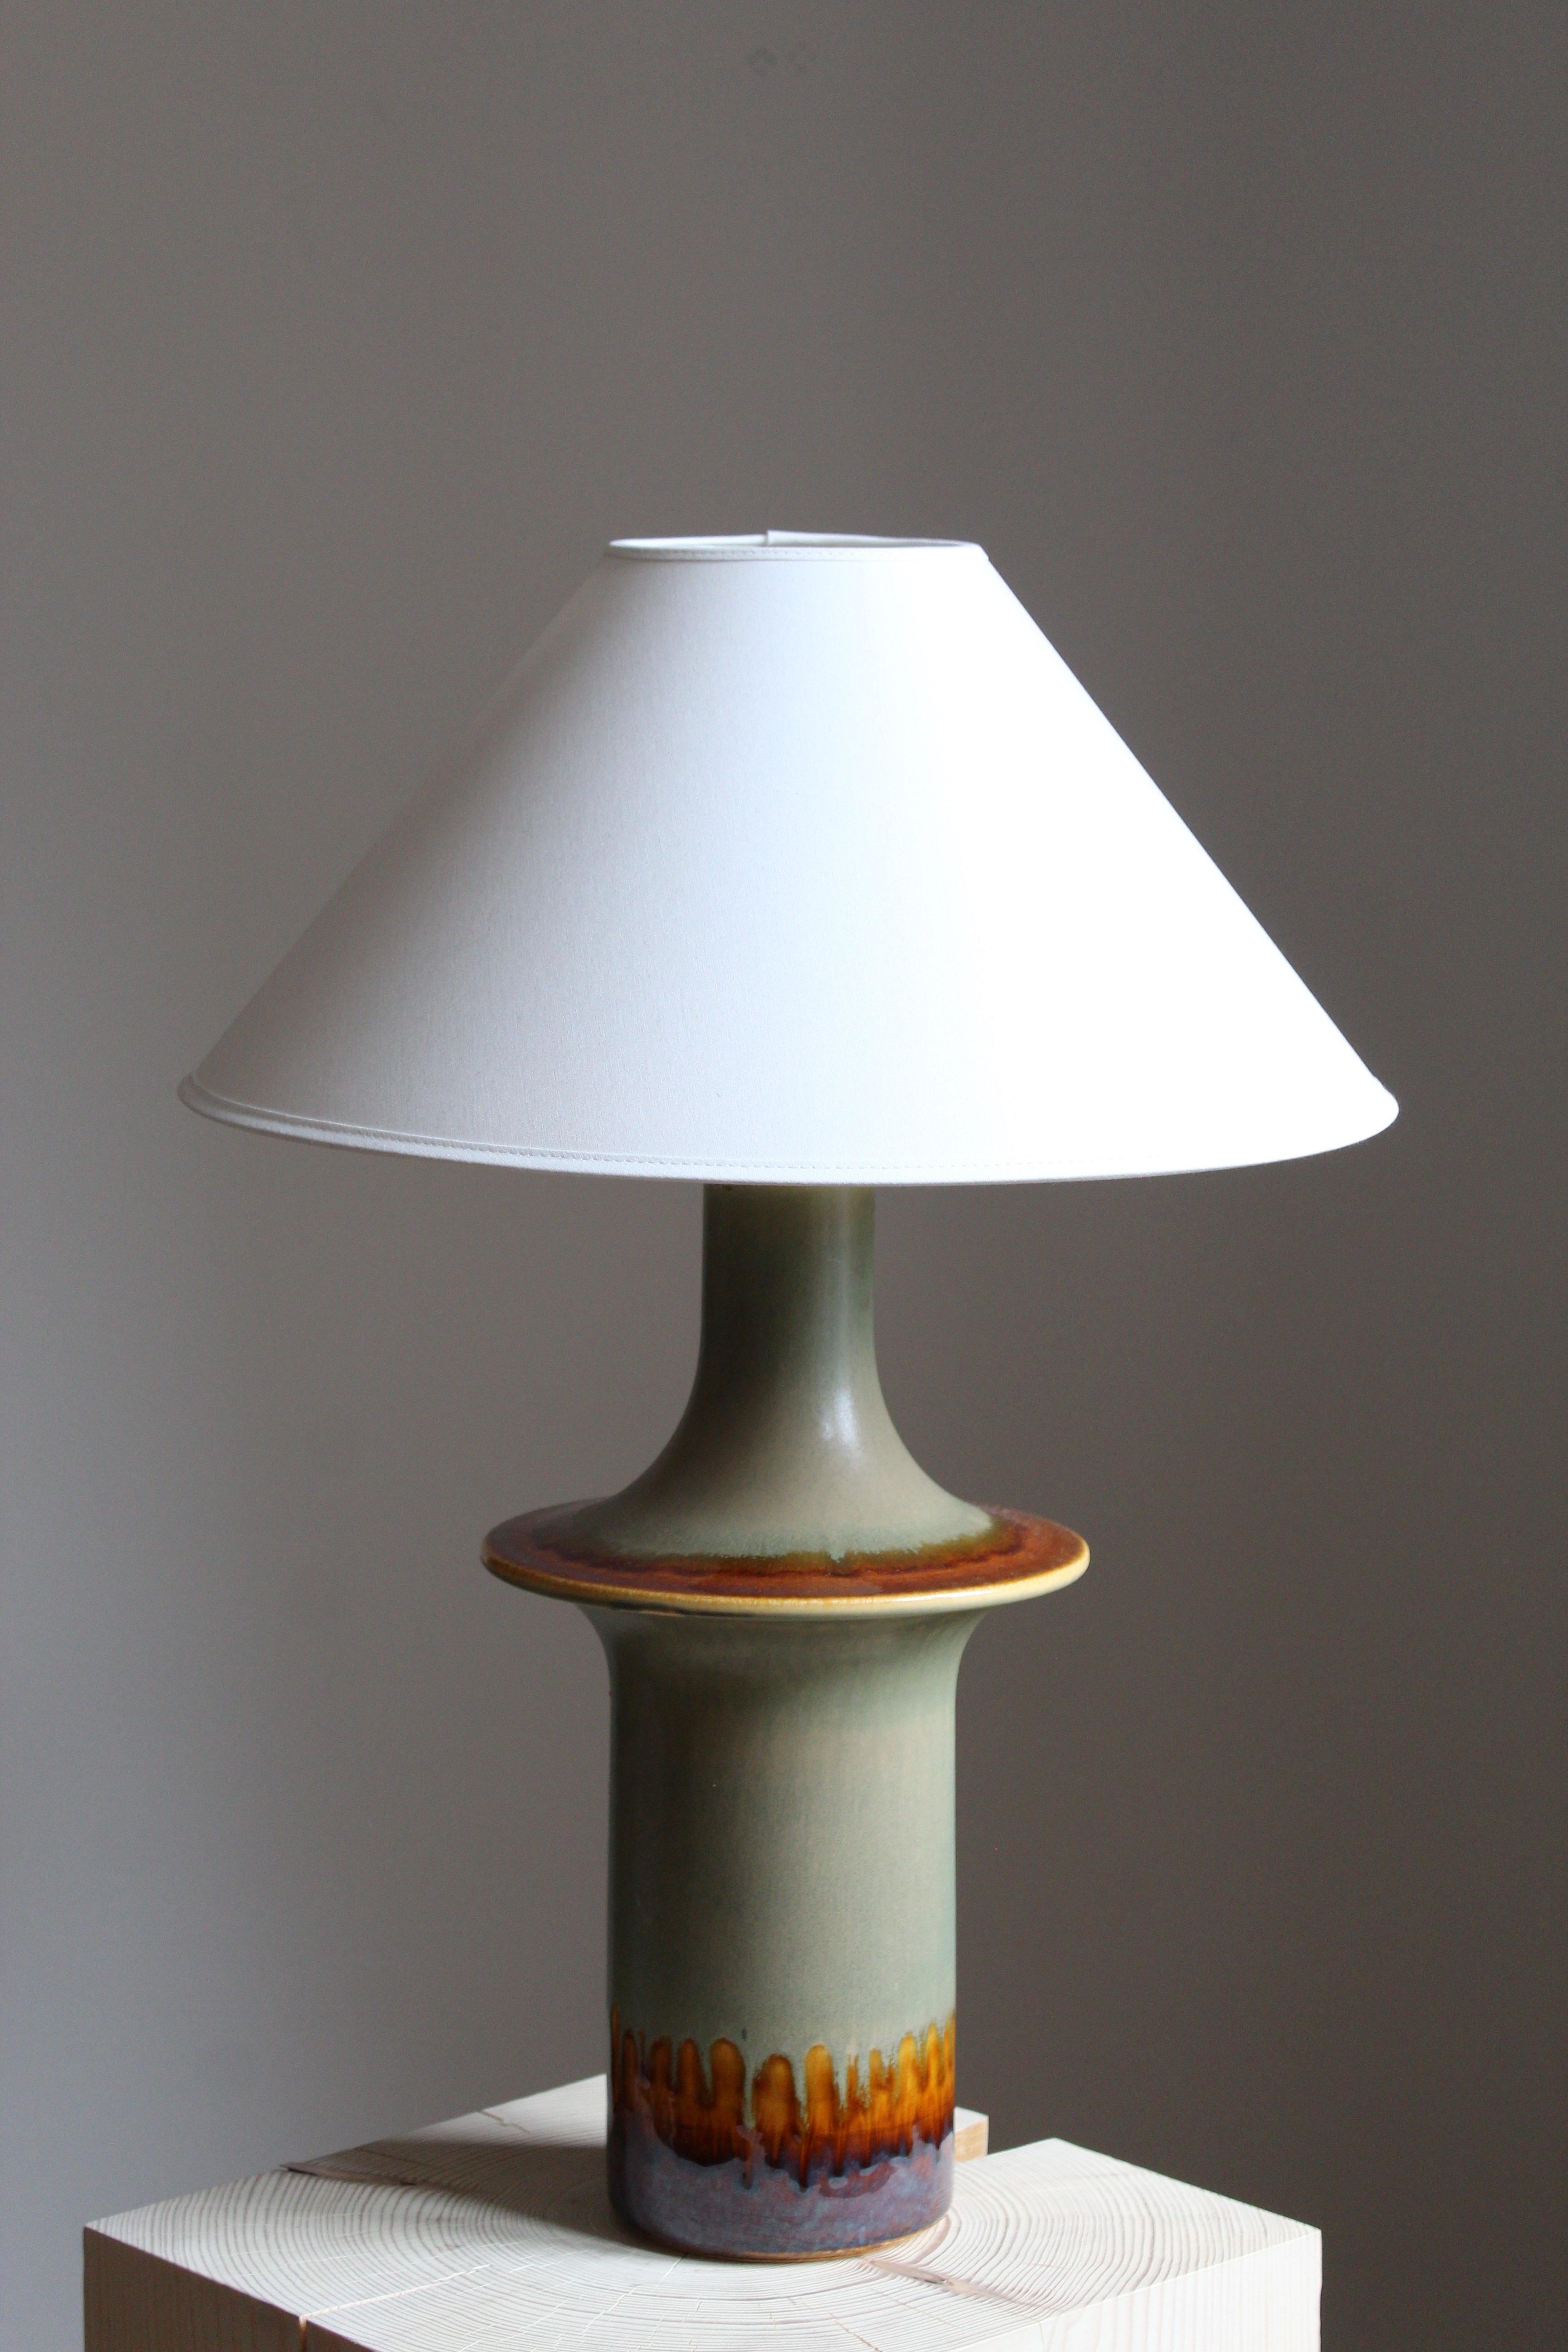 A sizable table lamp produced by Søholm Keramik, located on the island of Bornholm in Denmark. 

Glaze features green-blue-brown colors.

Sold without lampshade, stated dimensions excluding lampshade.